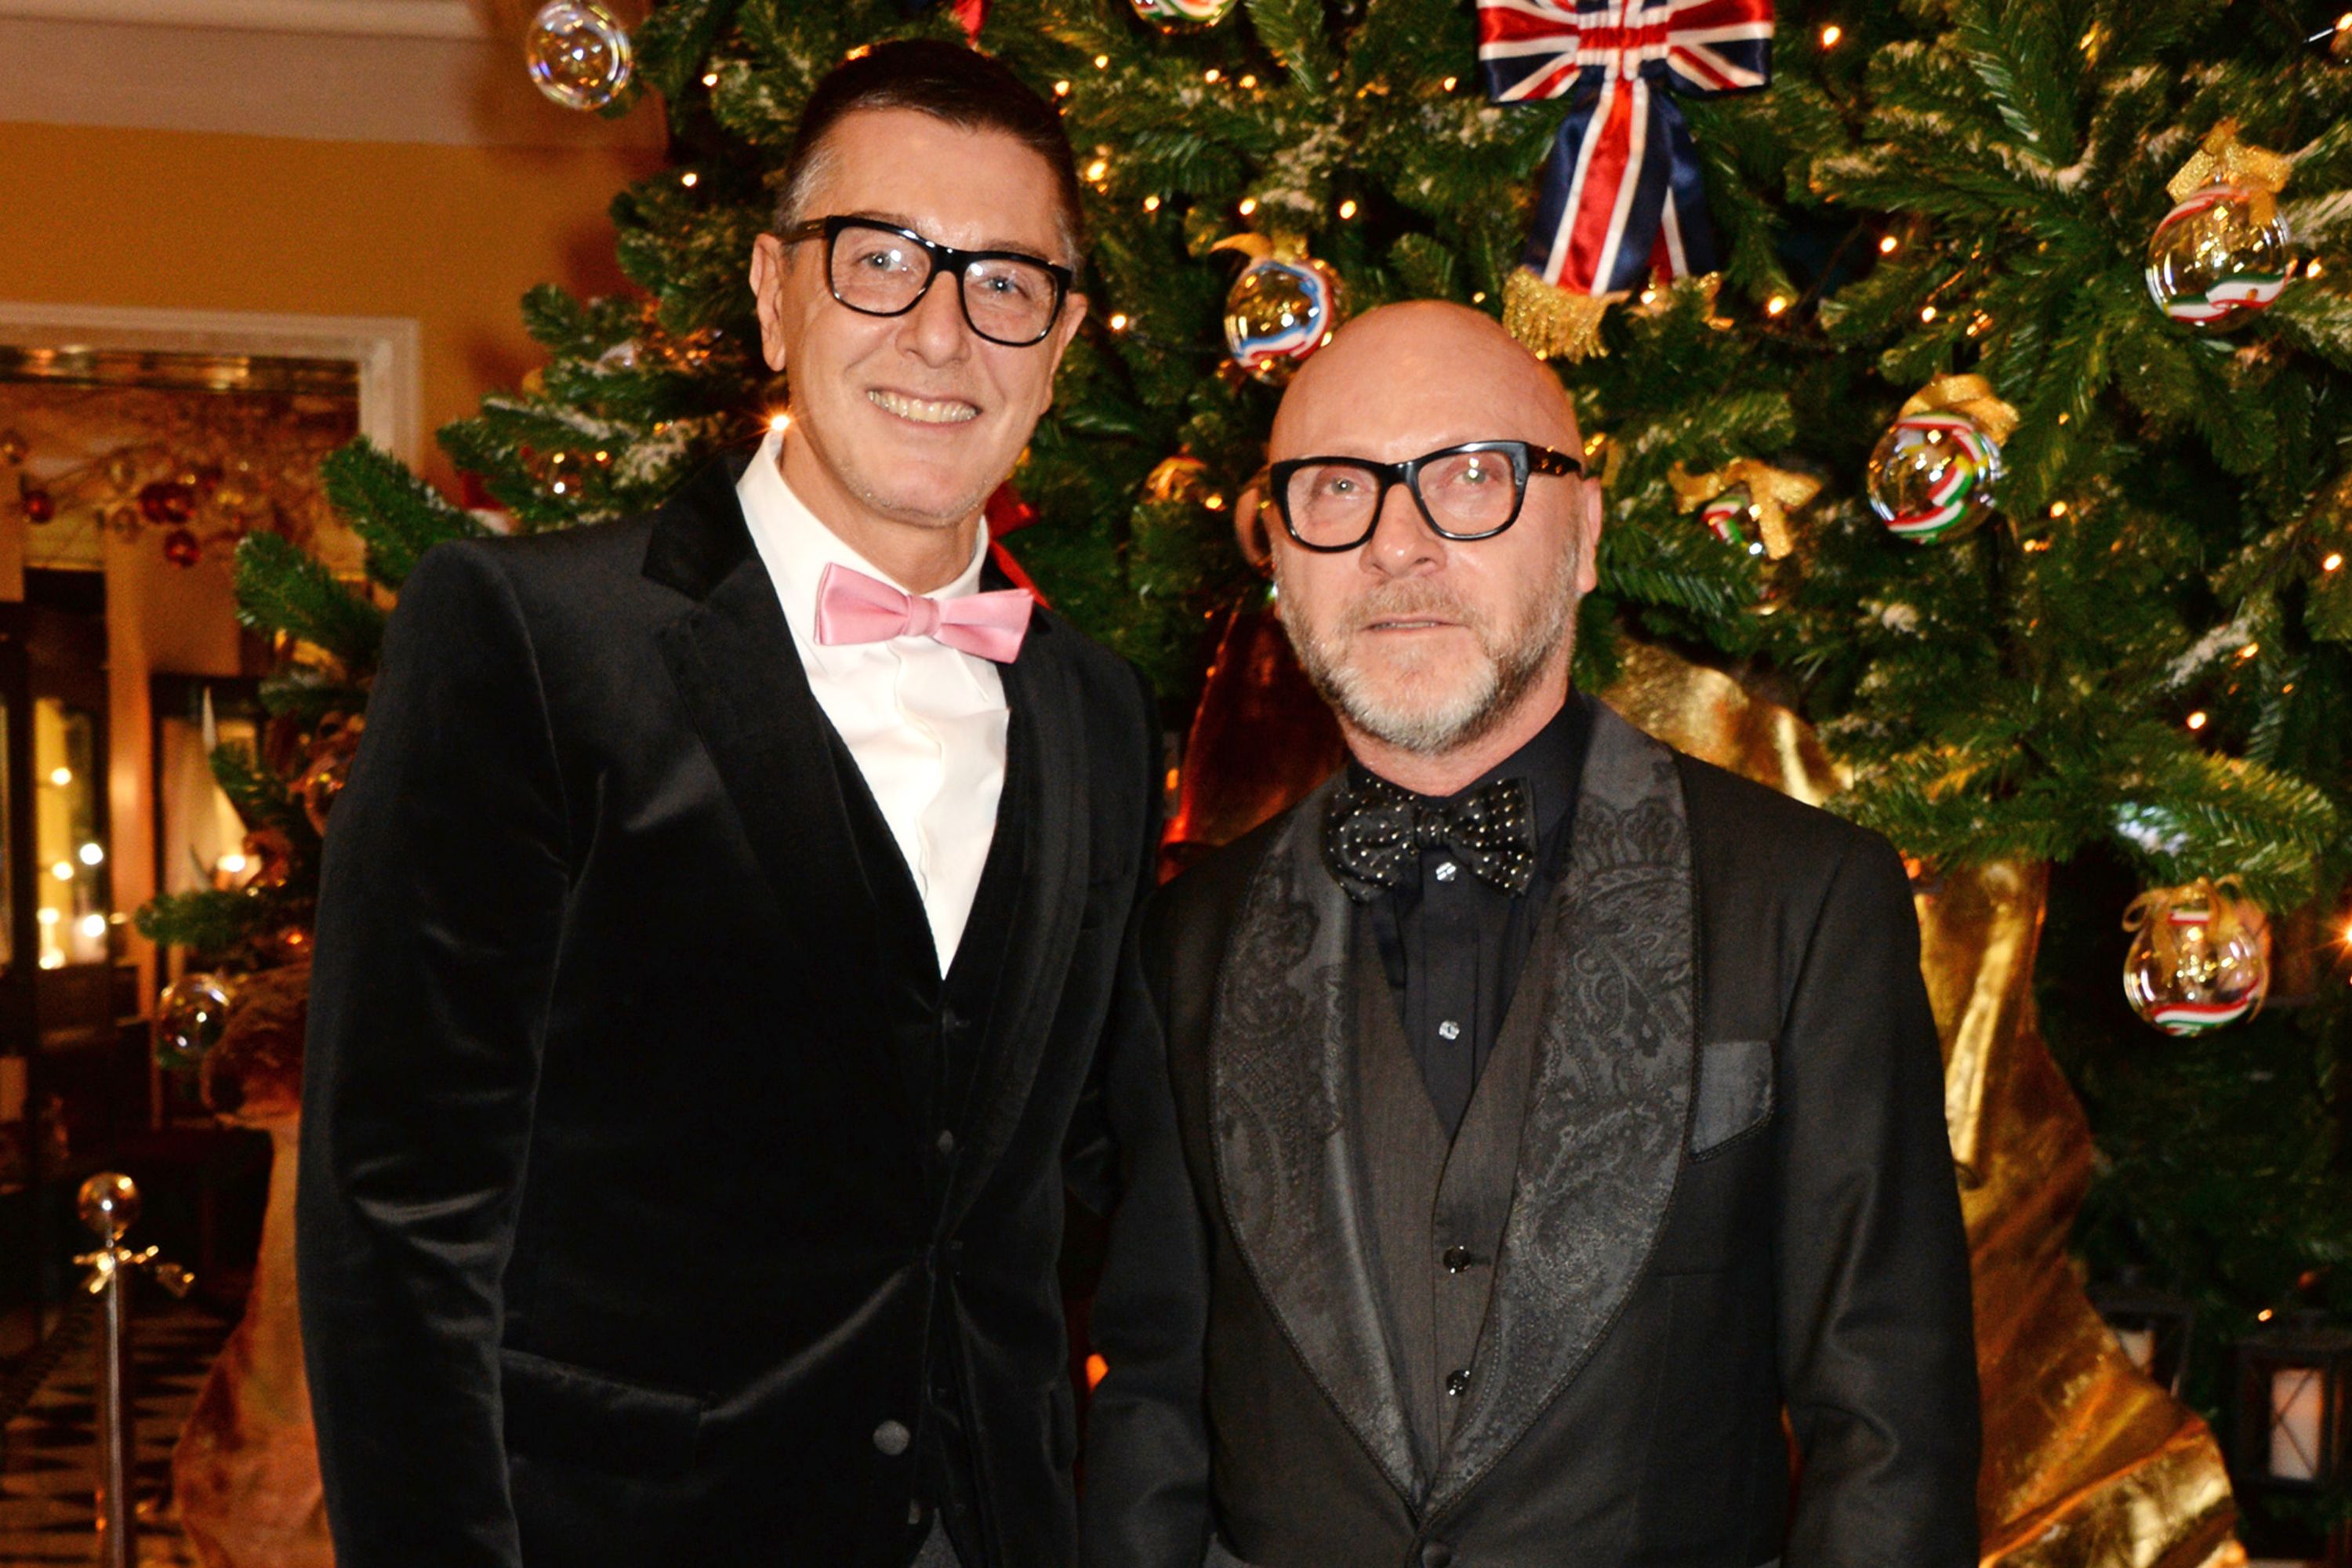 The Dolce & Gabbana guide to Christmas: How to celebrate in style